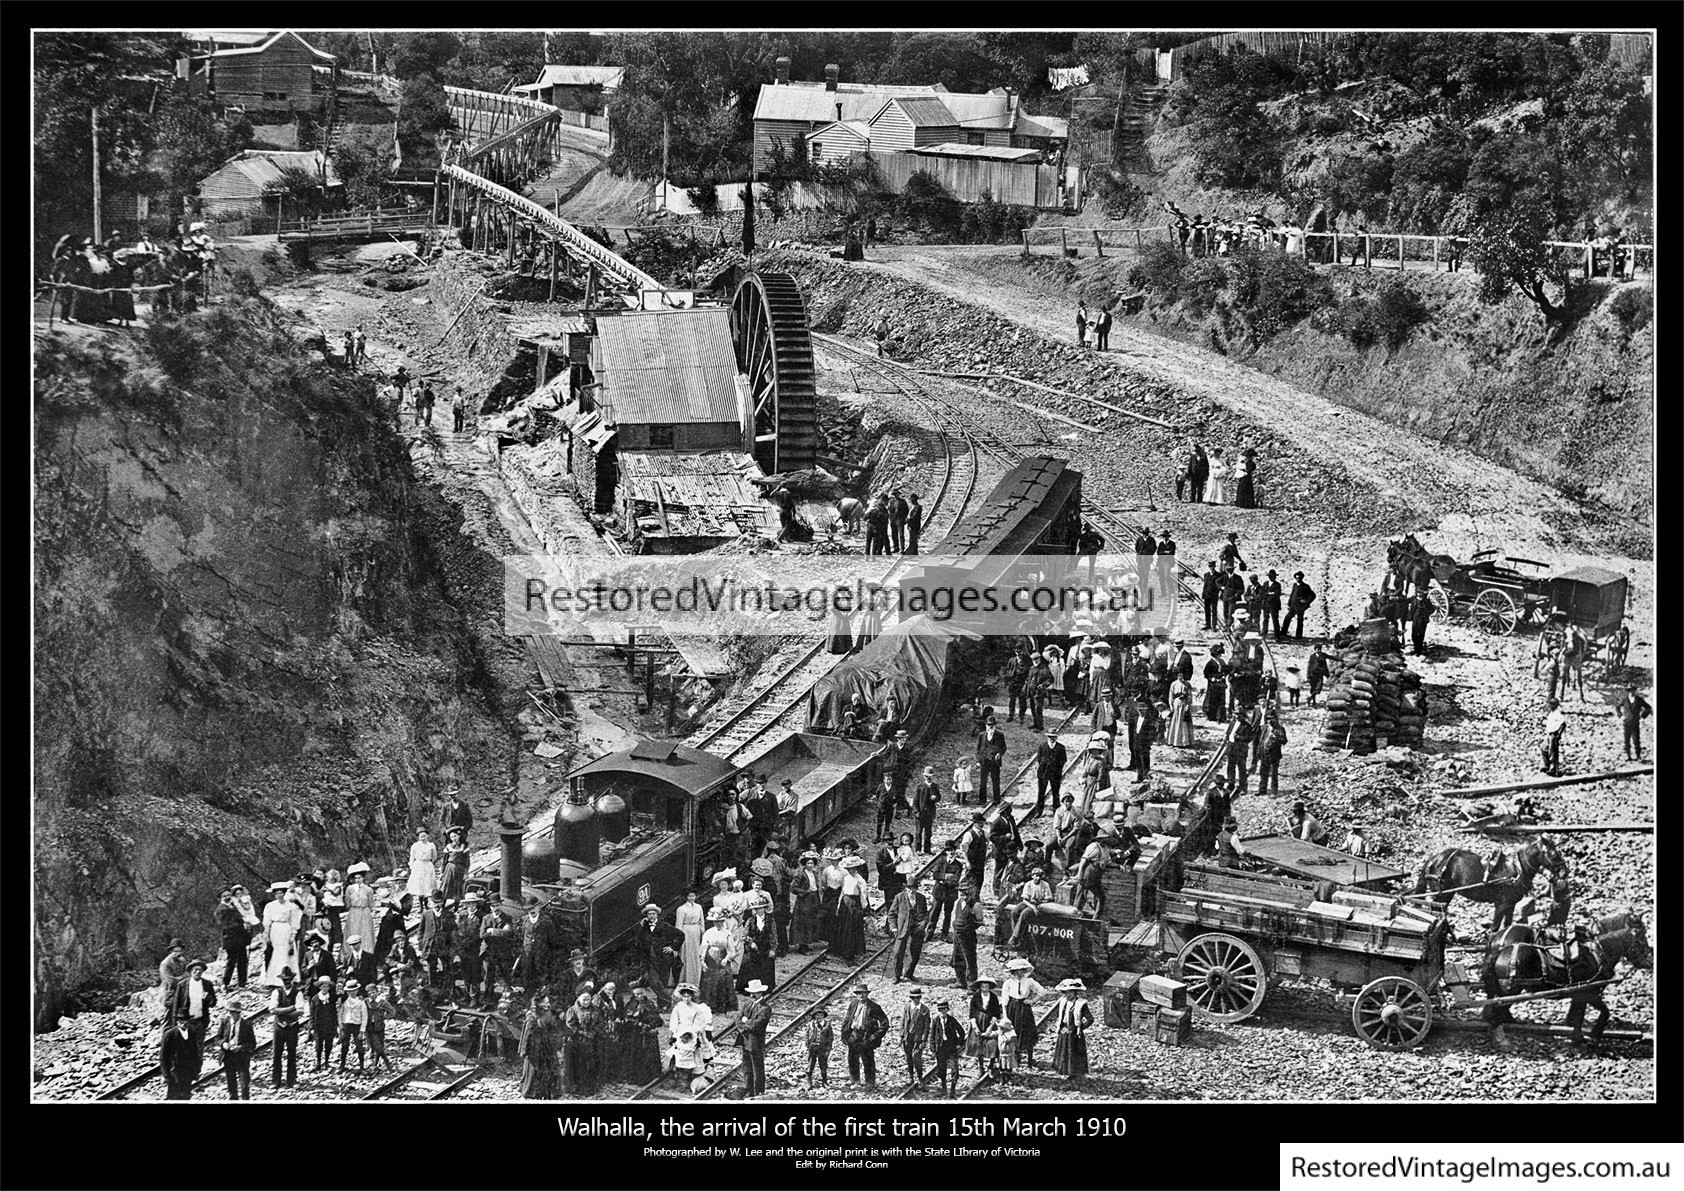 Walhalla – The Arrival Of The First Train In 1910